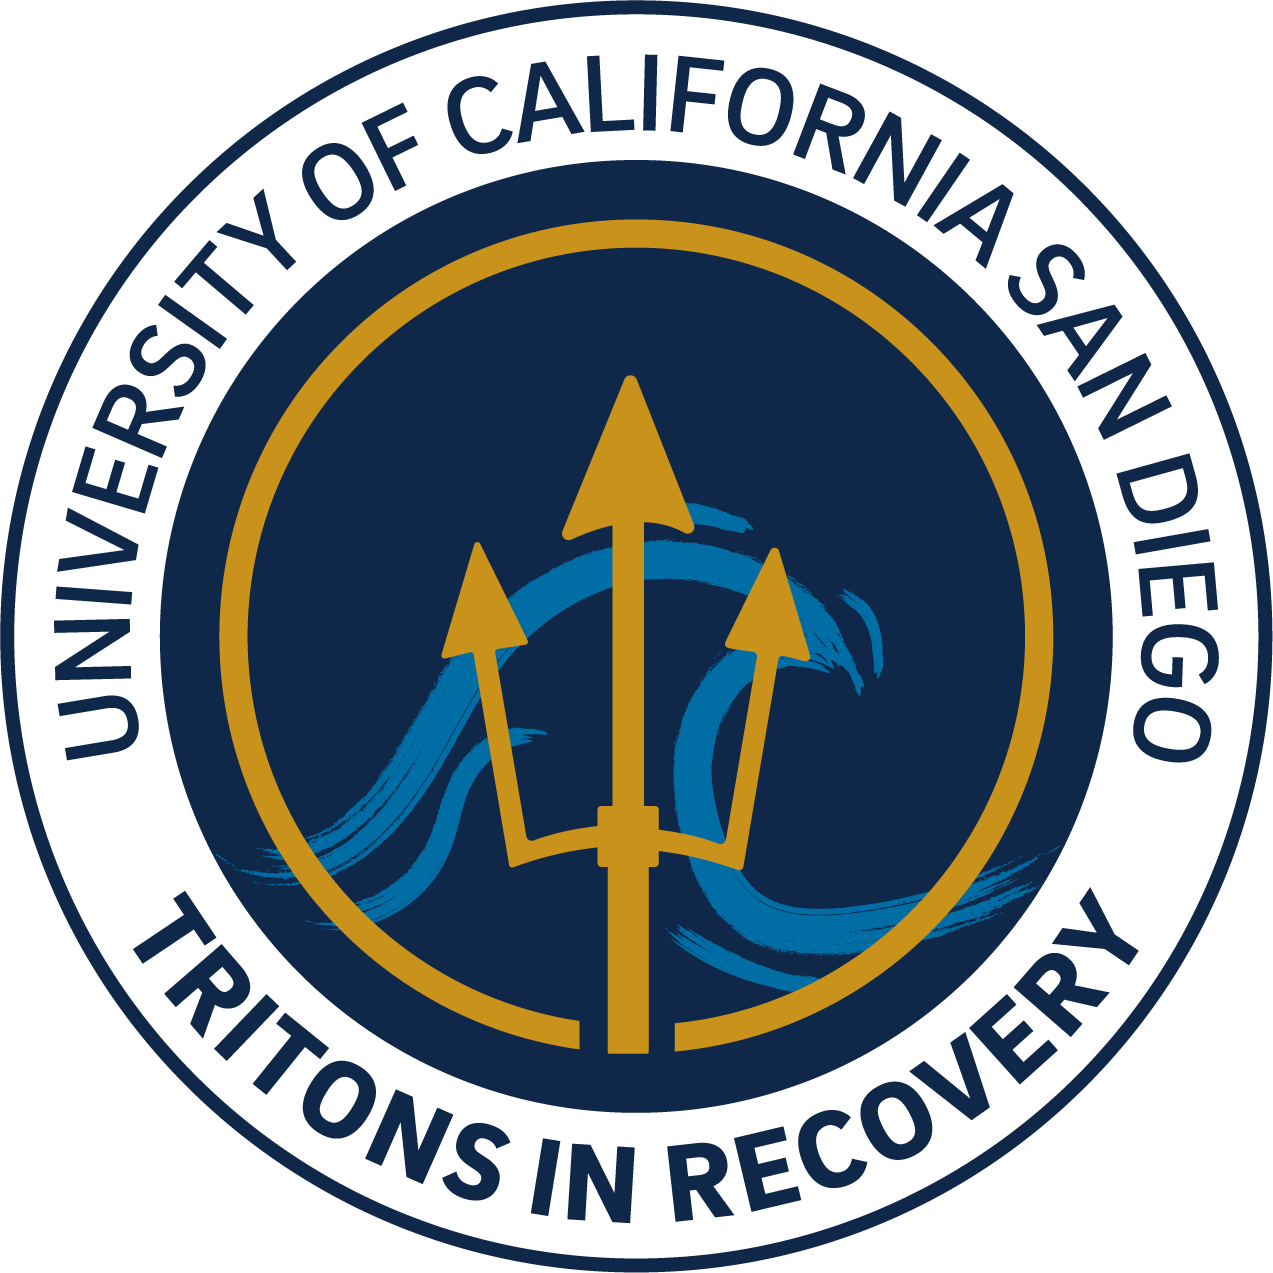 UCSD_Tritons-in-Recovery_logo.png